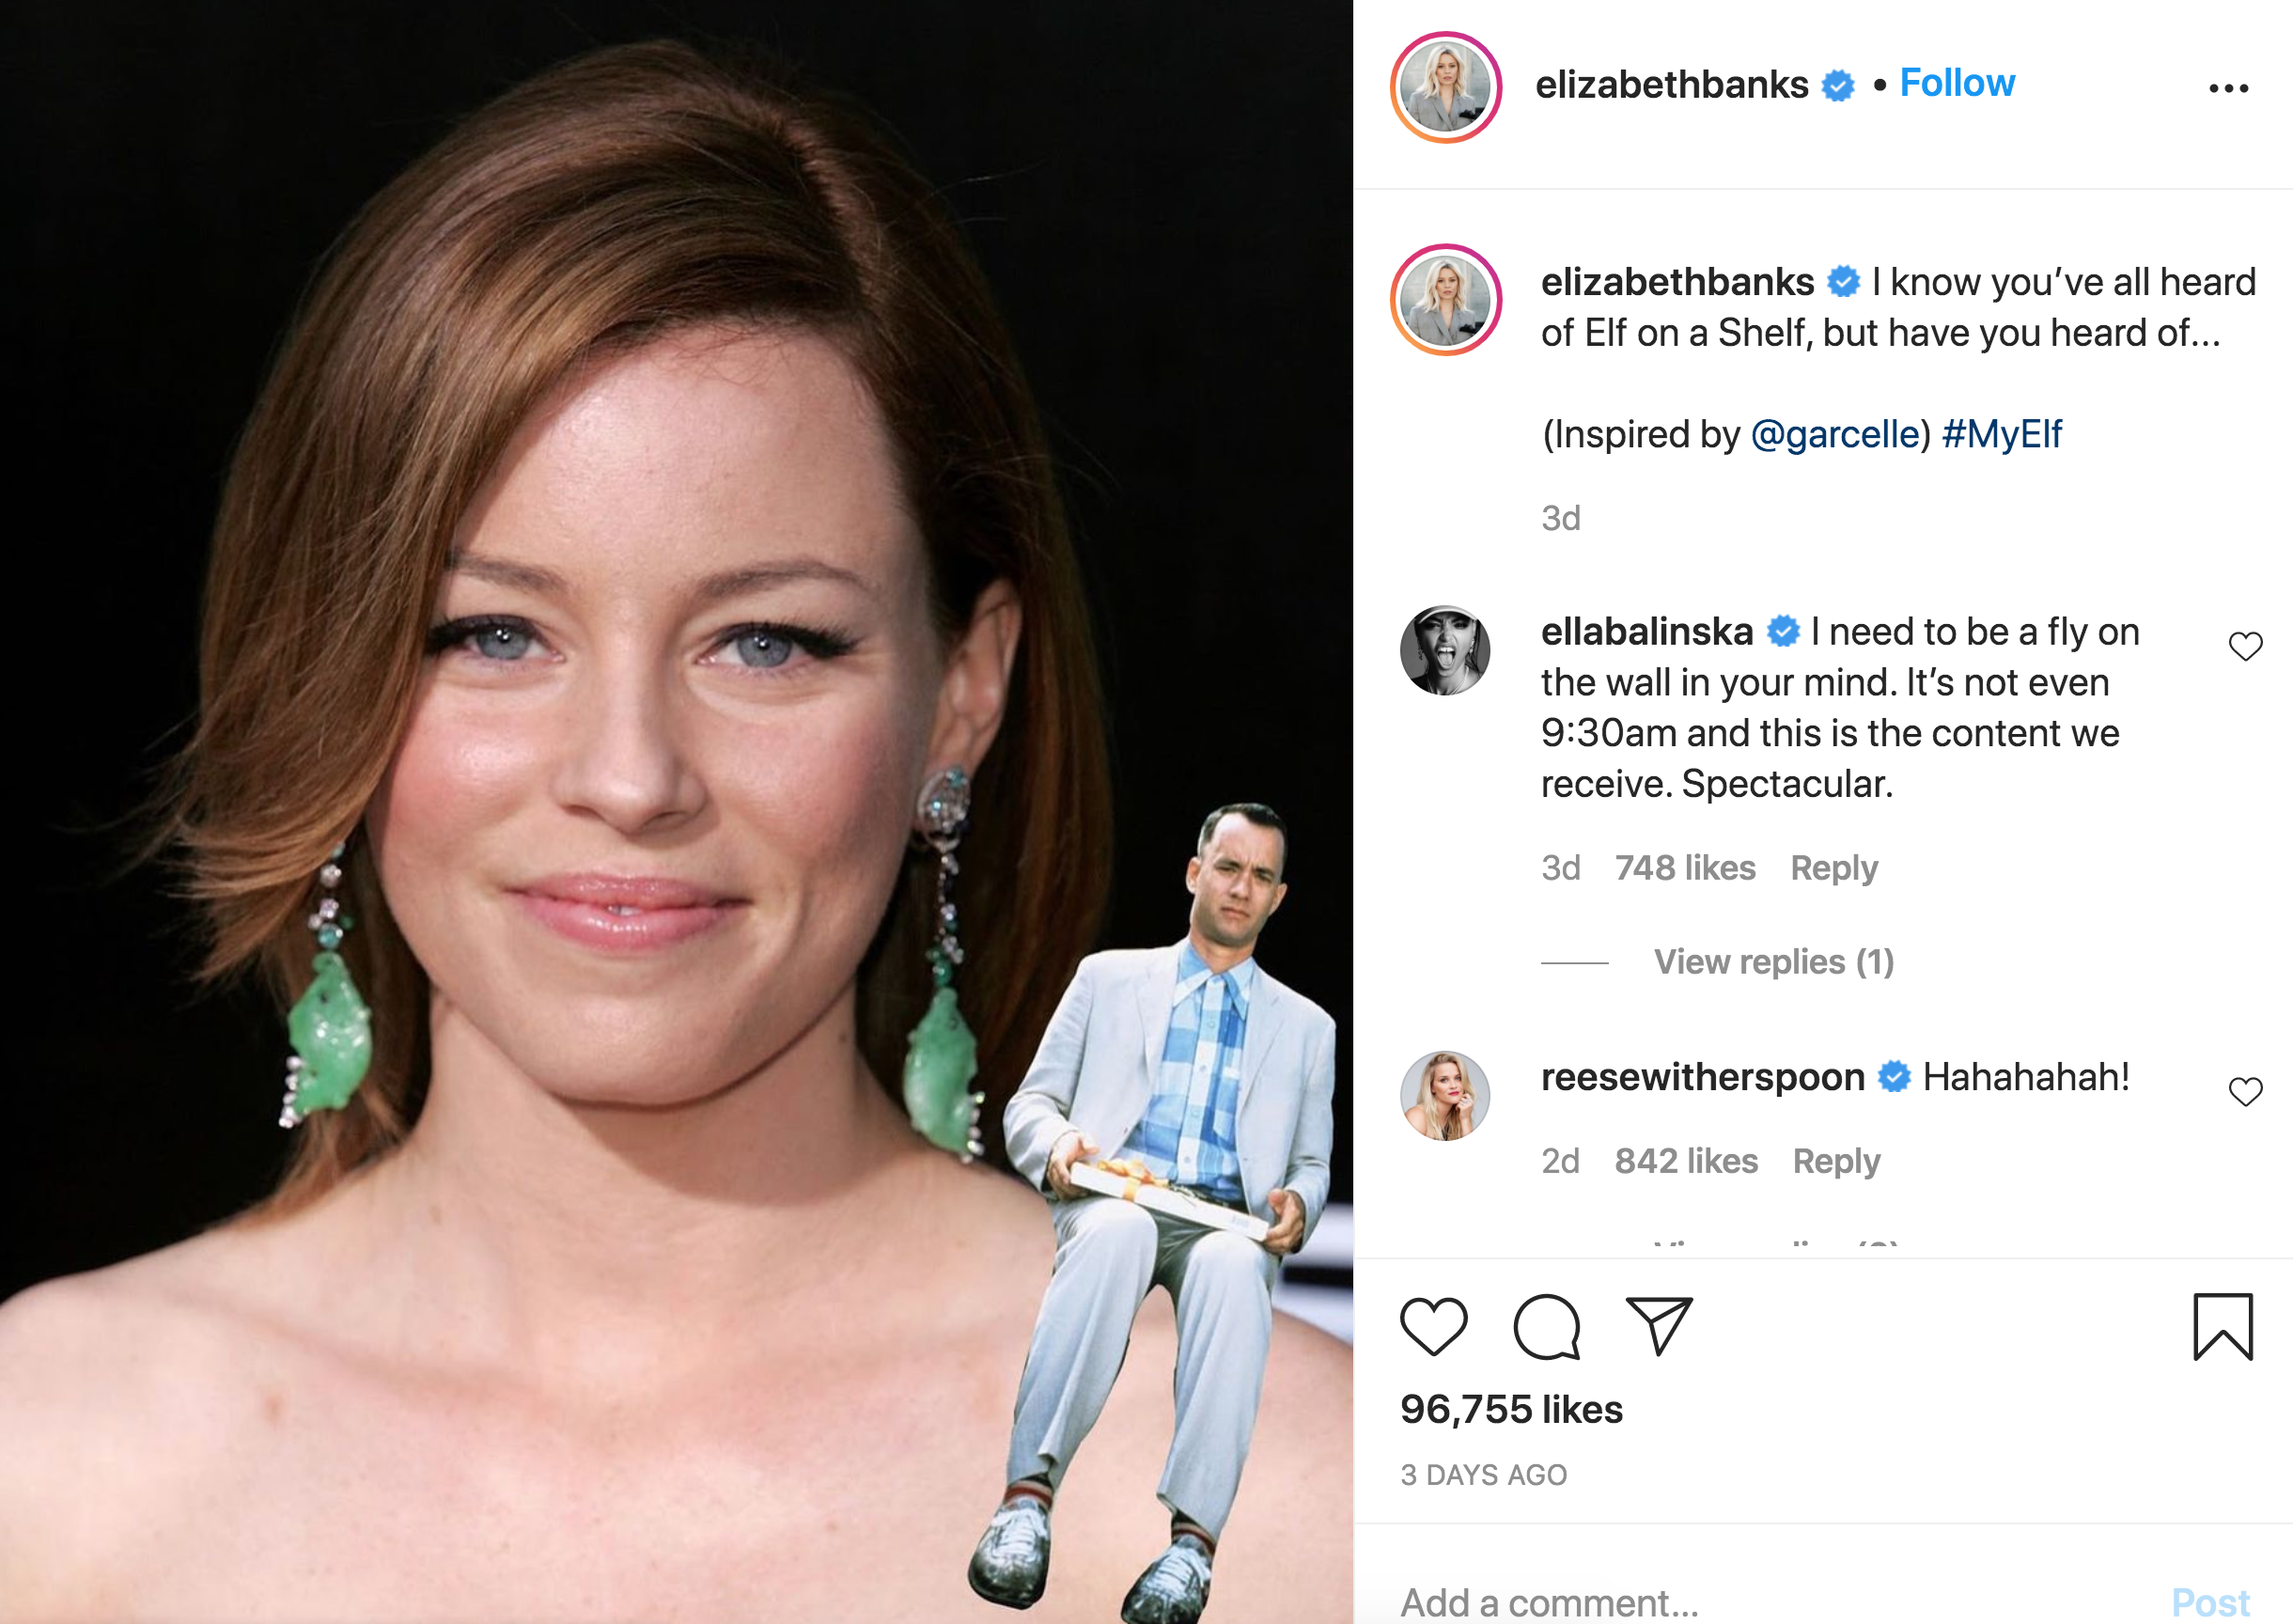 tom hanks forrest gump - elizabethbanks. elizabethbanks I know you've all heard of Elf on a Shelf, but have you heard of... Inspired by 3d ellabalinska I need to be a fly on the wall in your mind. It's not even am and this is the content we receive. Spect